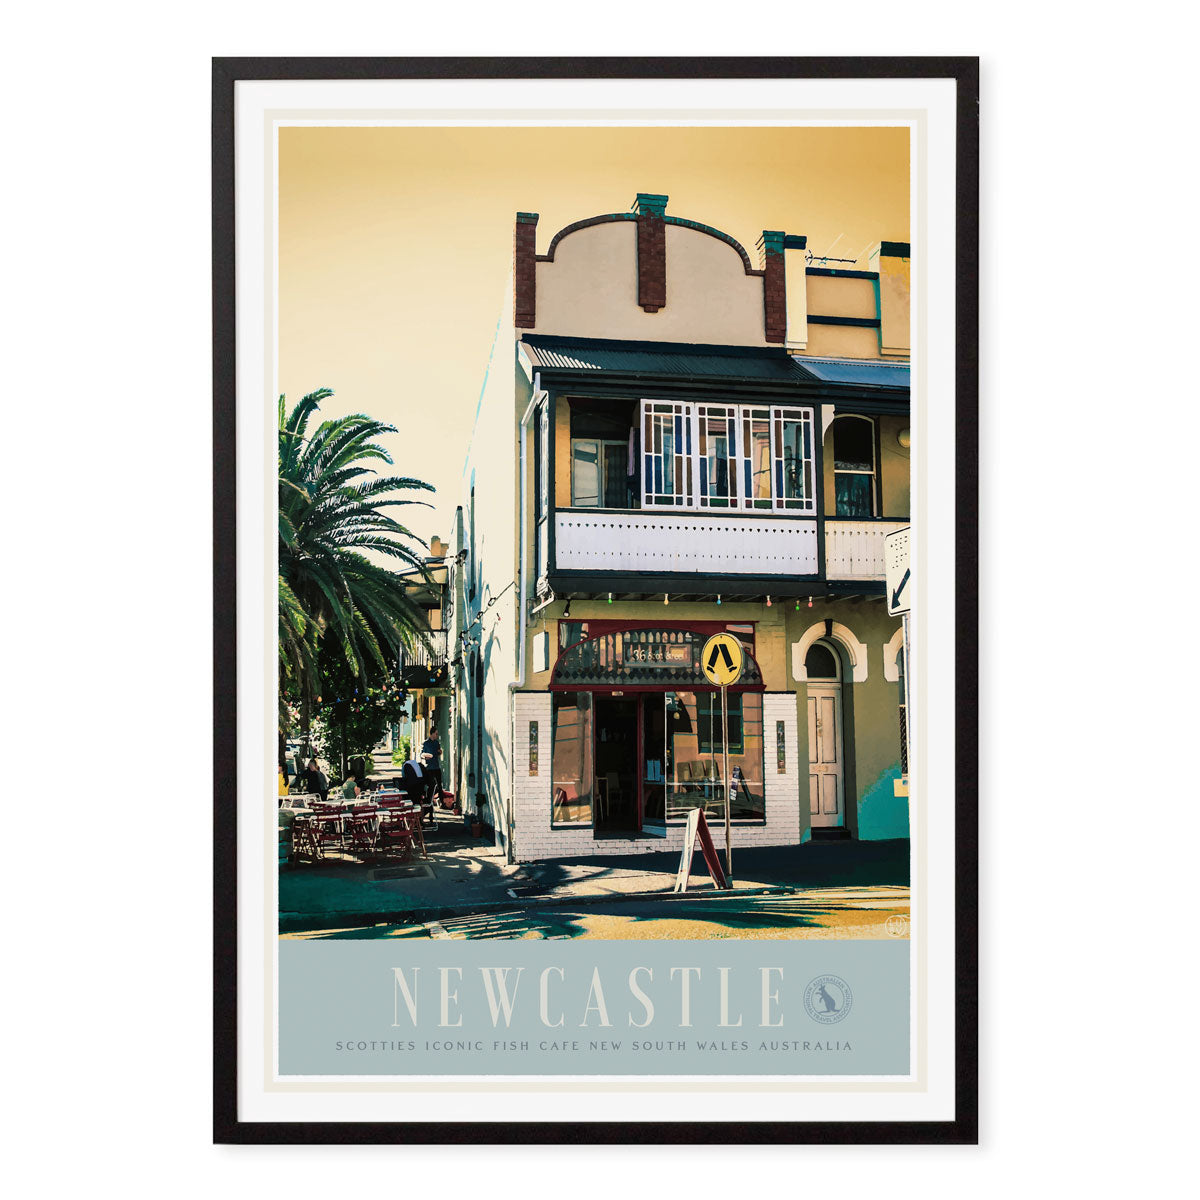 Newcastle East NSW retro vintage travel poster print in black frame from Places We Luv